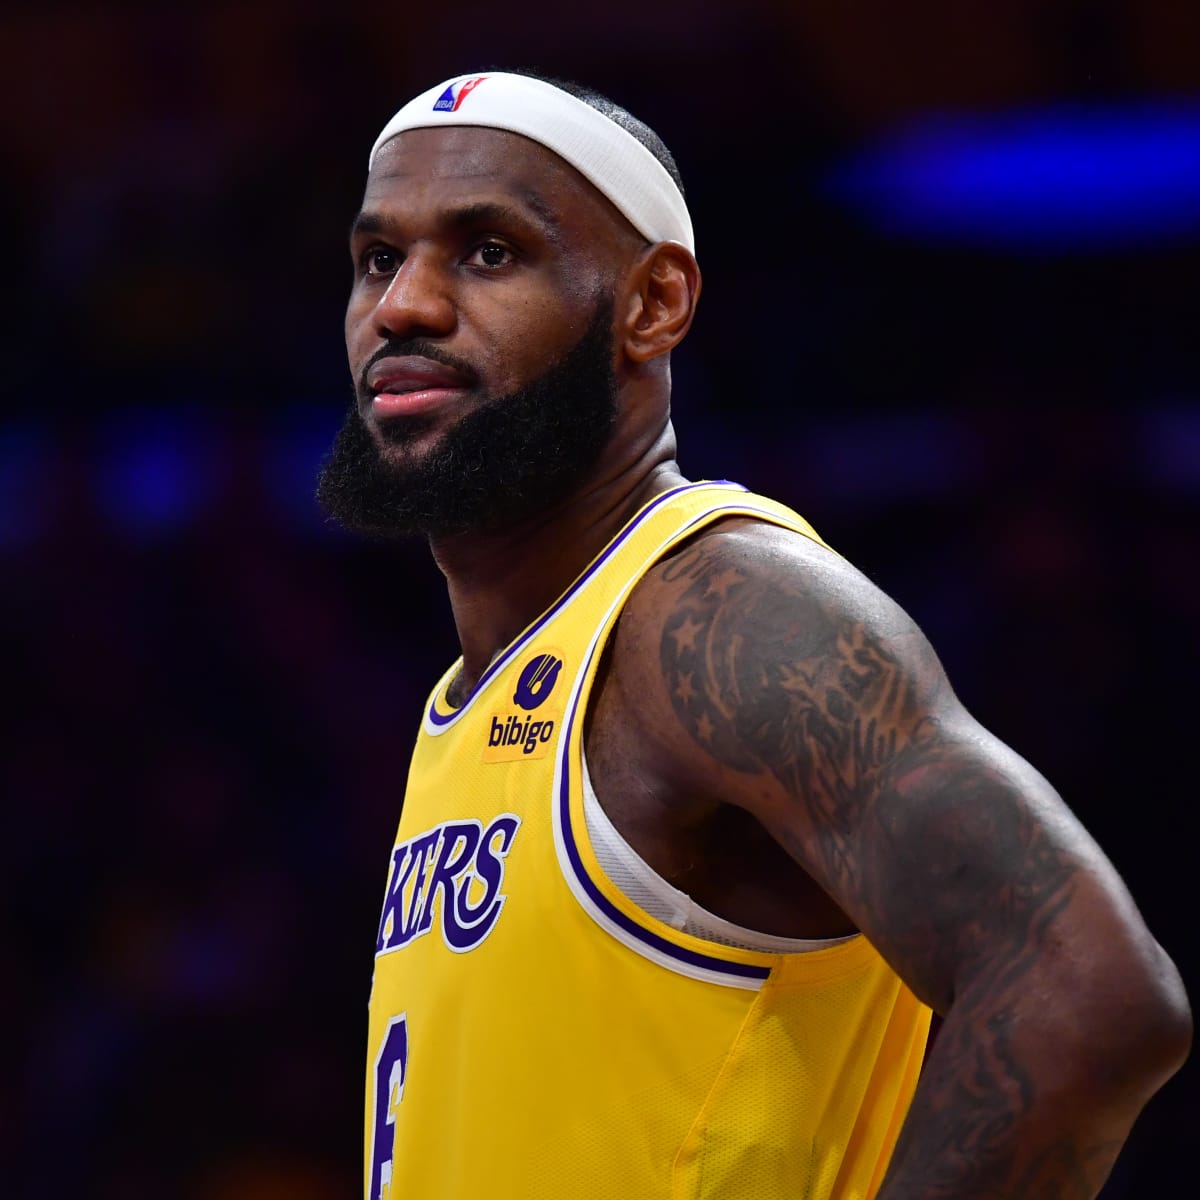 LeBron James Shares First Photo in Lakers Jersey